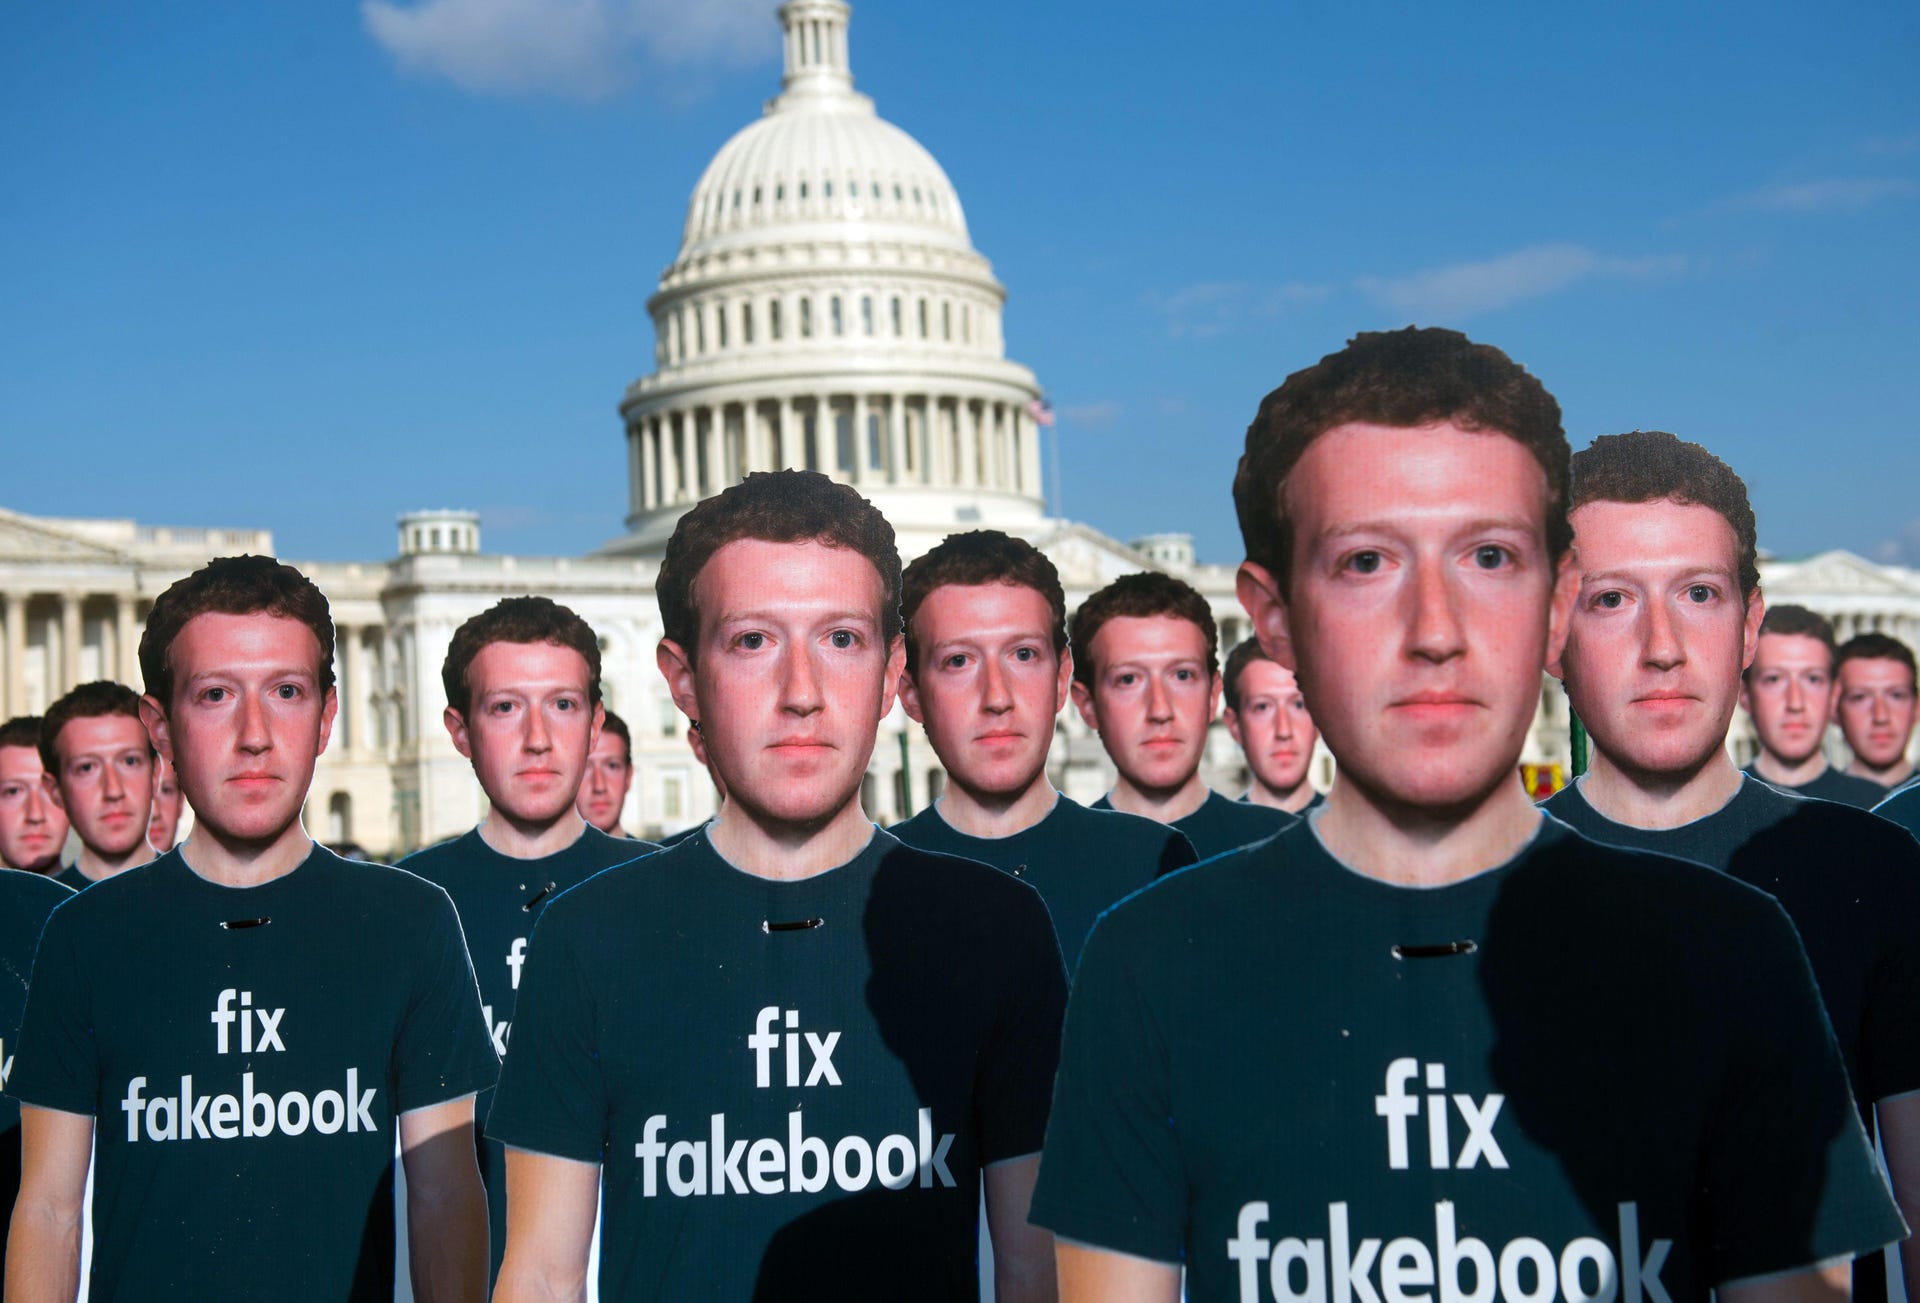 Cardboard cutouts of Mark Zuckerberg with the US Capitol building in the background.